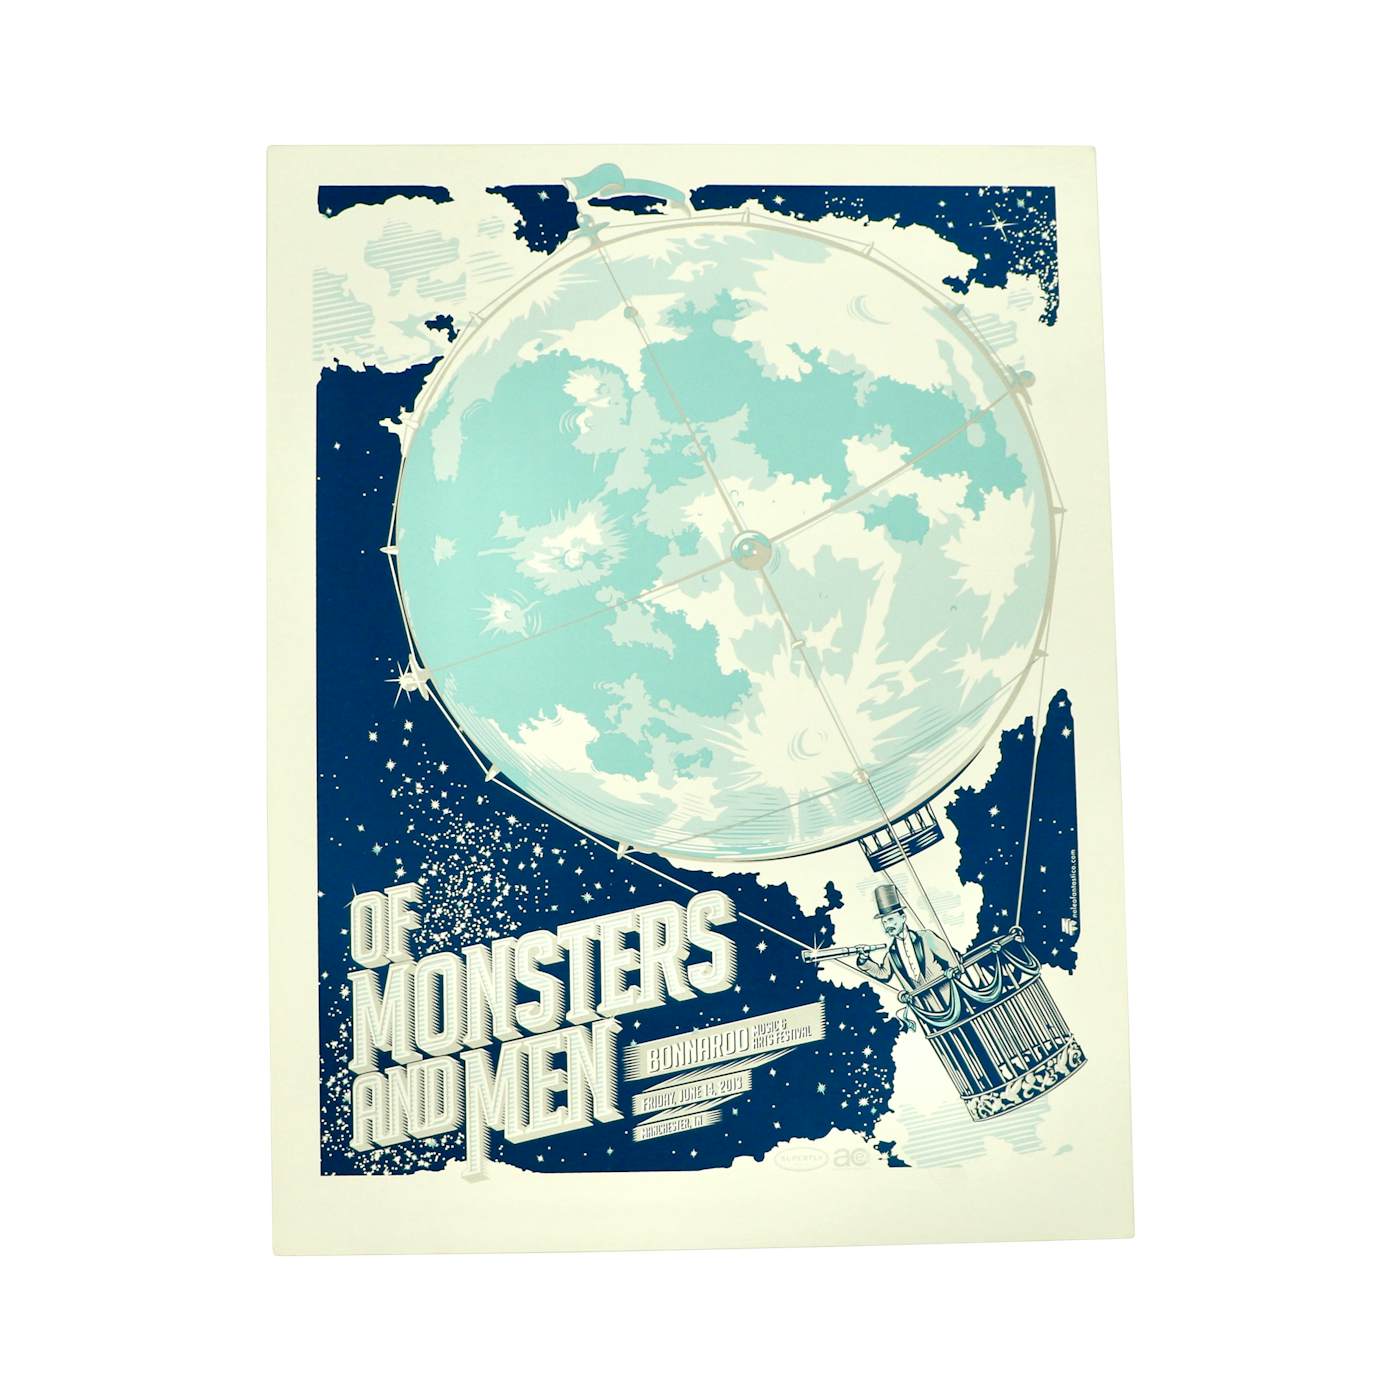 Of Monsters and Men Bonnaroo Poster